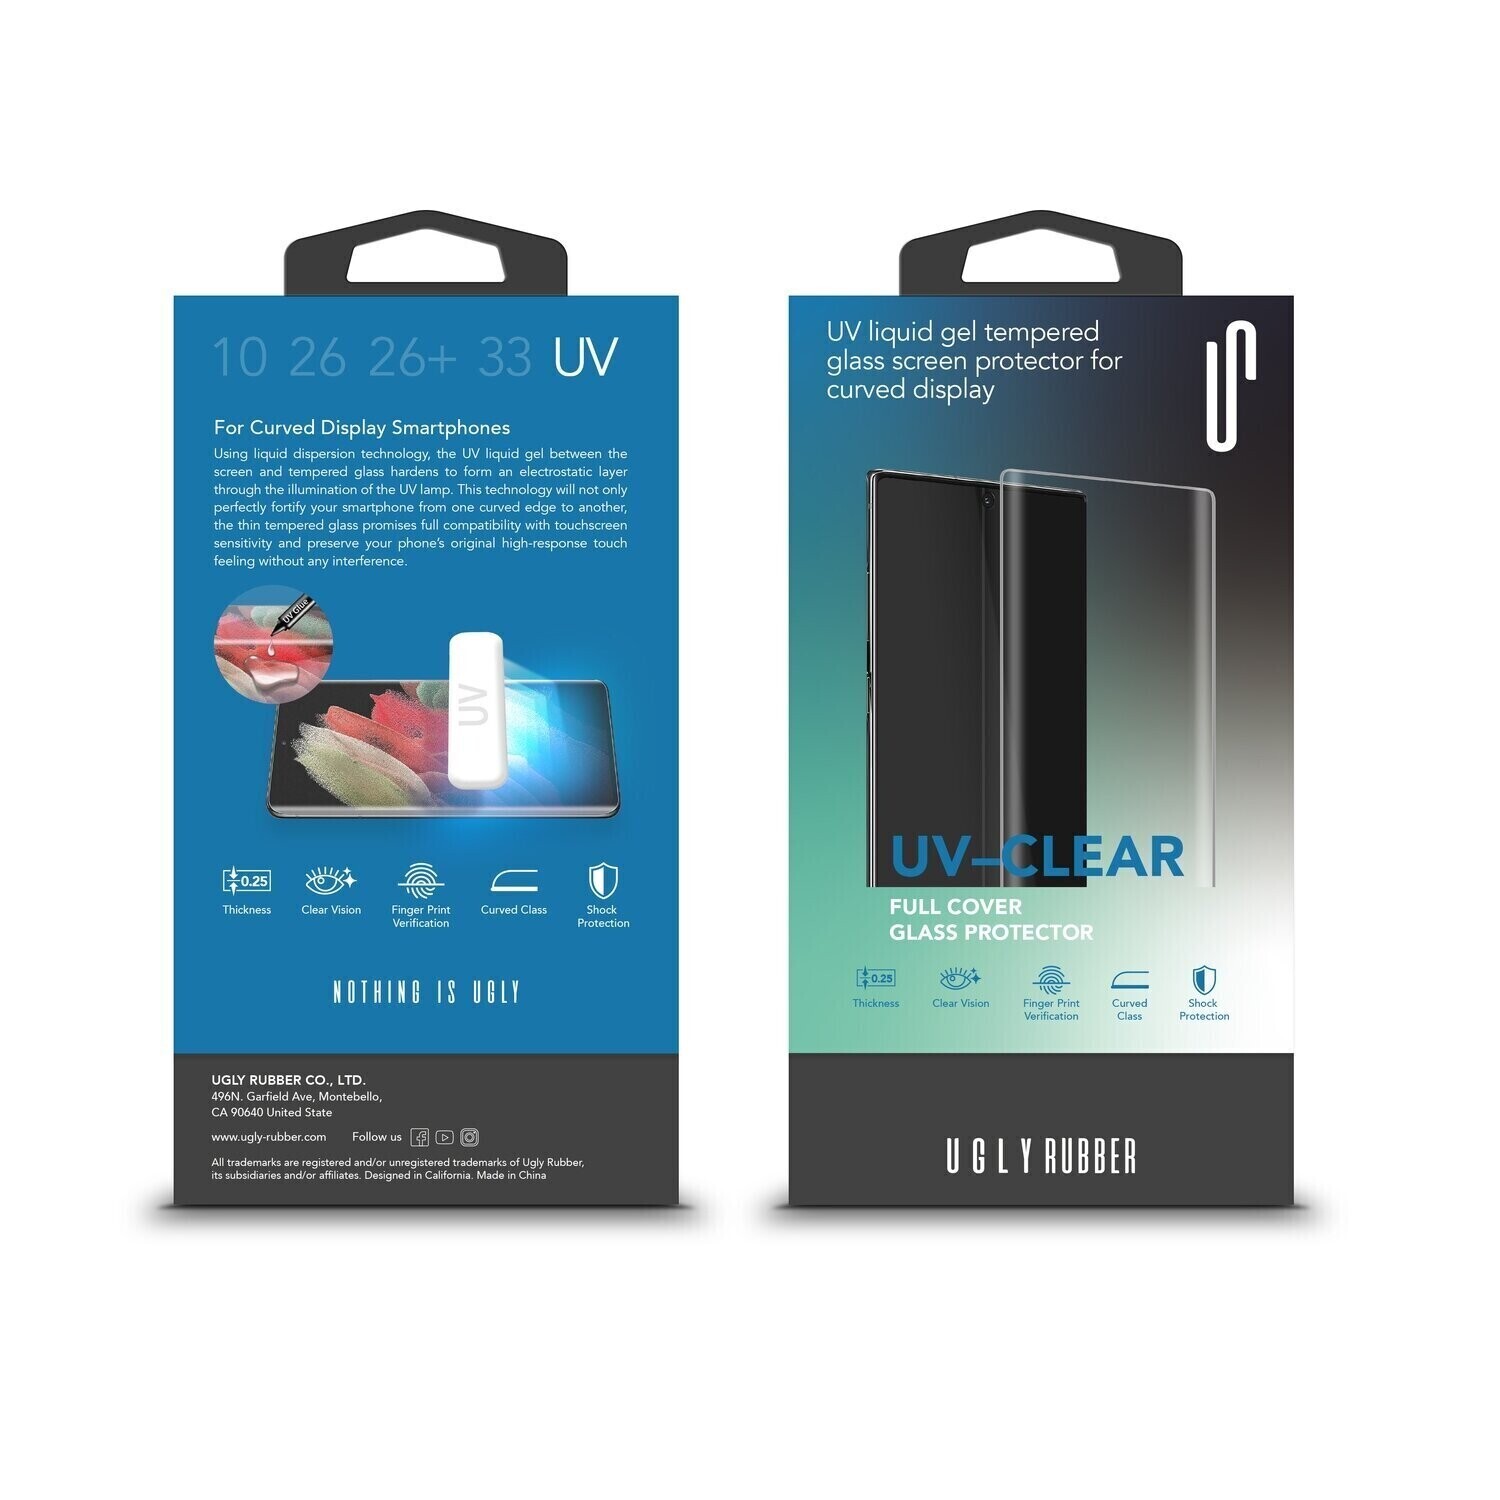 Ugly Rubber Samsung Galaxy S10+ UV Liquid Gel Tempered Glass, Clear (Screen Protector)